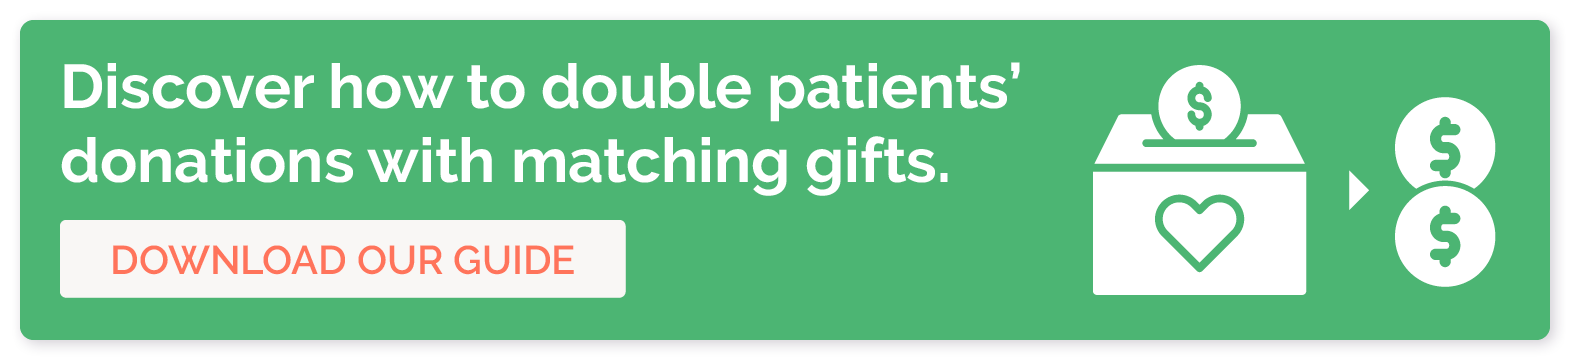 Discover how to double patients' donations with matching gifts. Download our guide. 